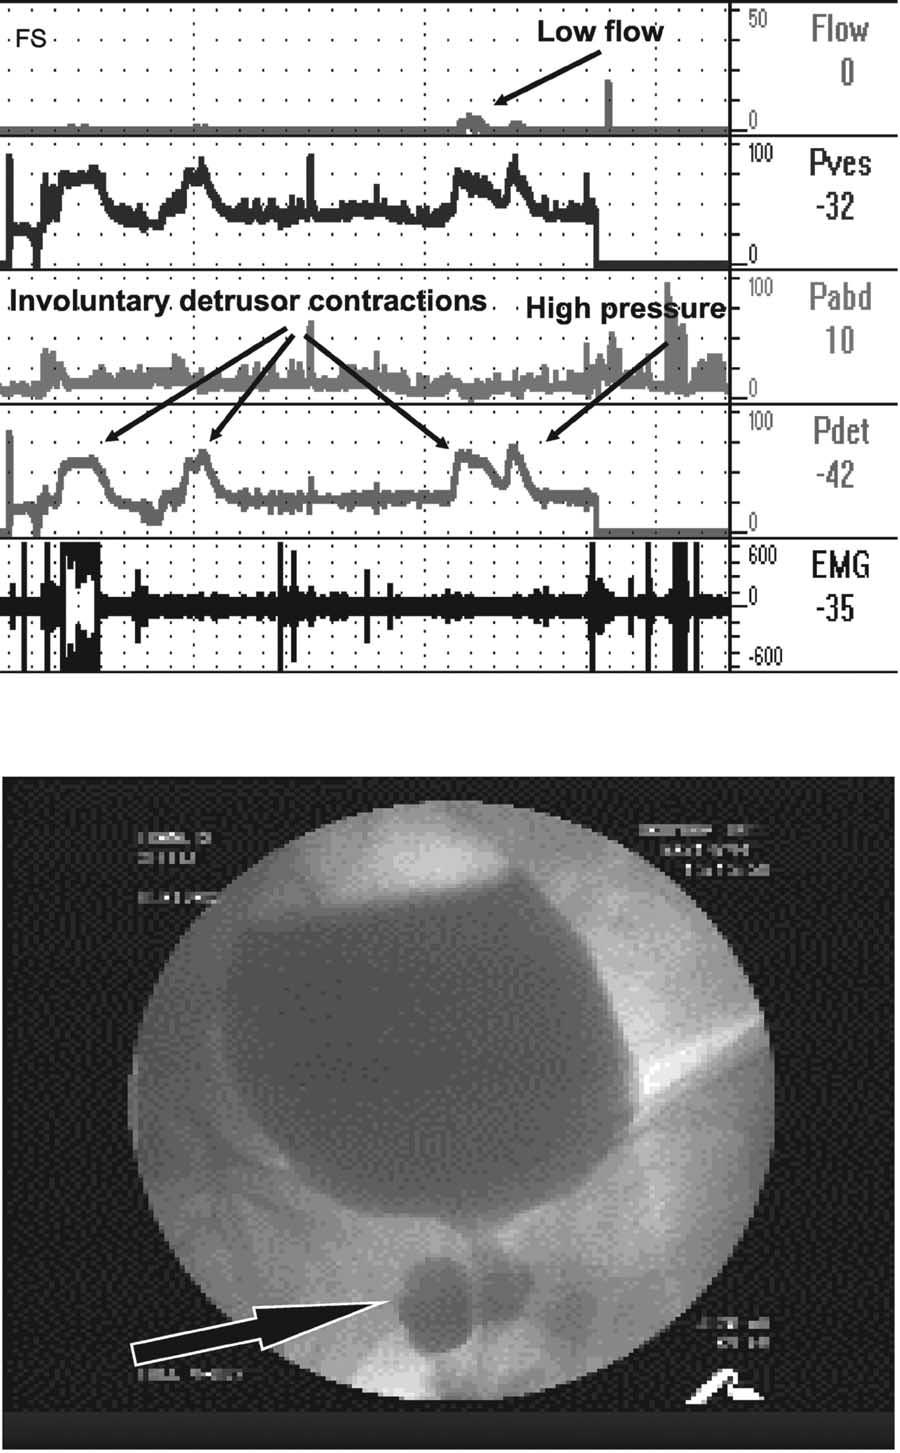 FIGURE 5. Involuntary detrusor contractions in a woman with obstruction caused by a large, multiclocular urethral diverticulum.